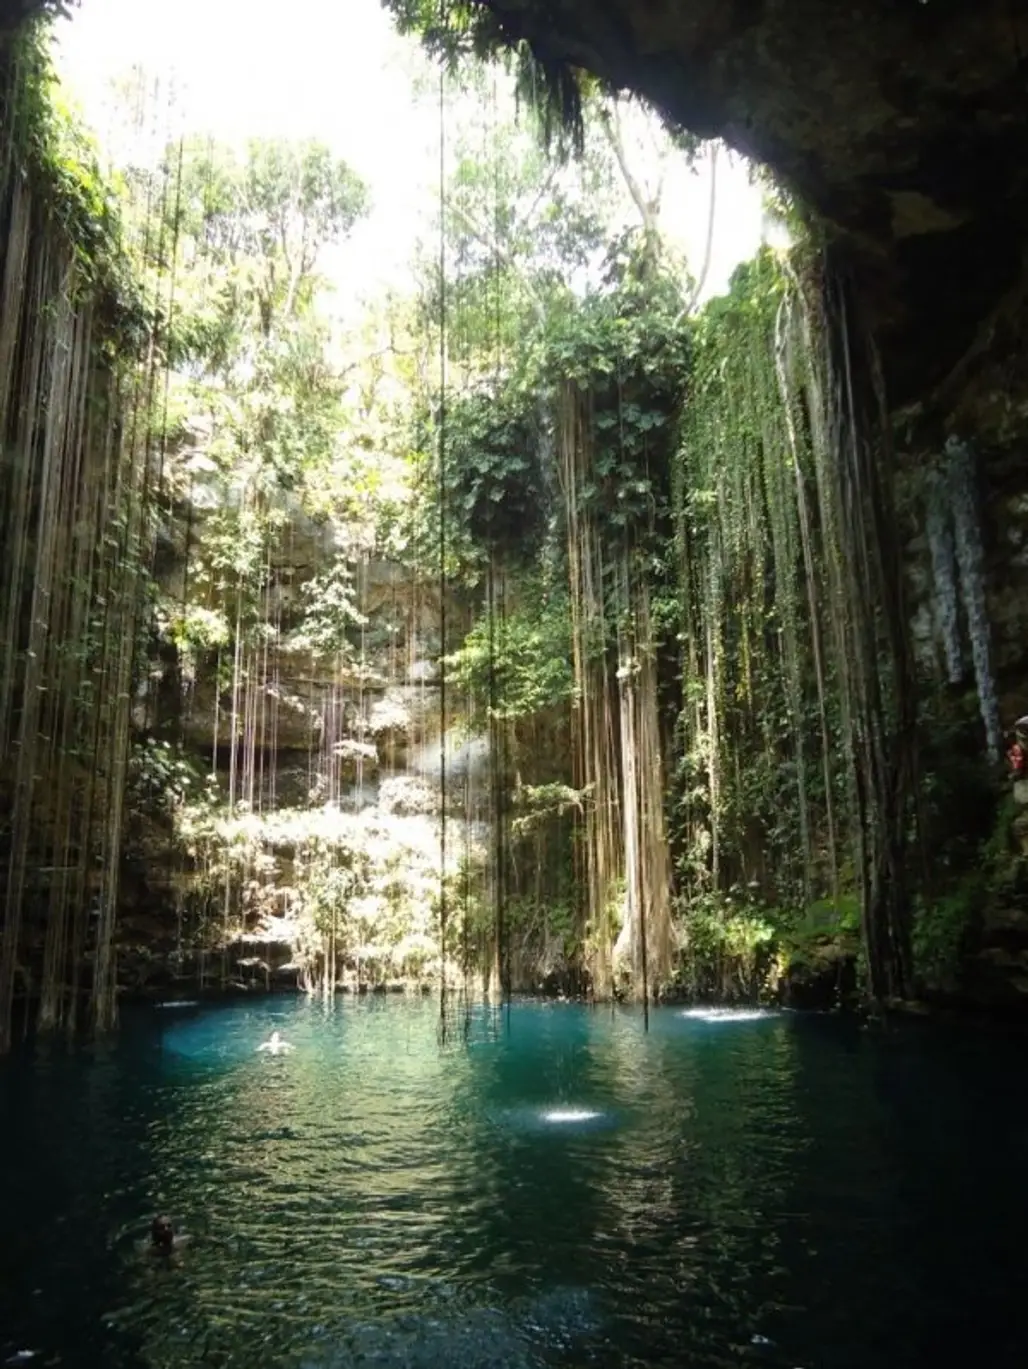 Mexico’s Natural Underground Springs